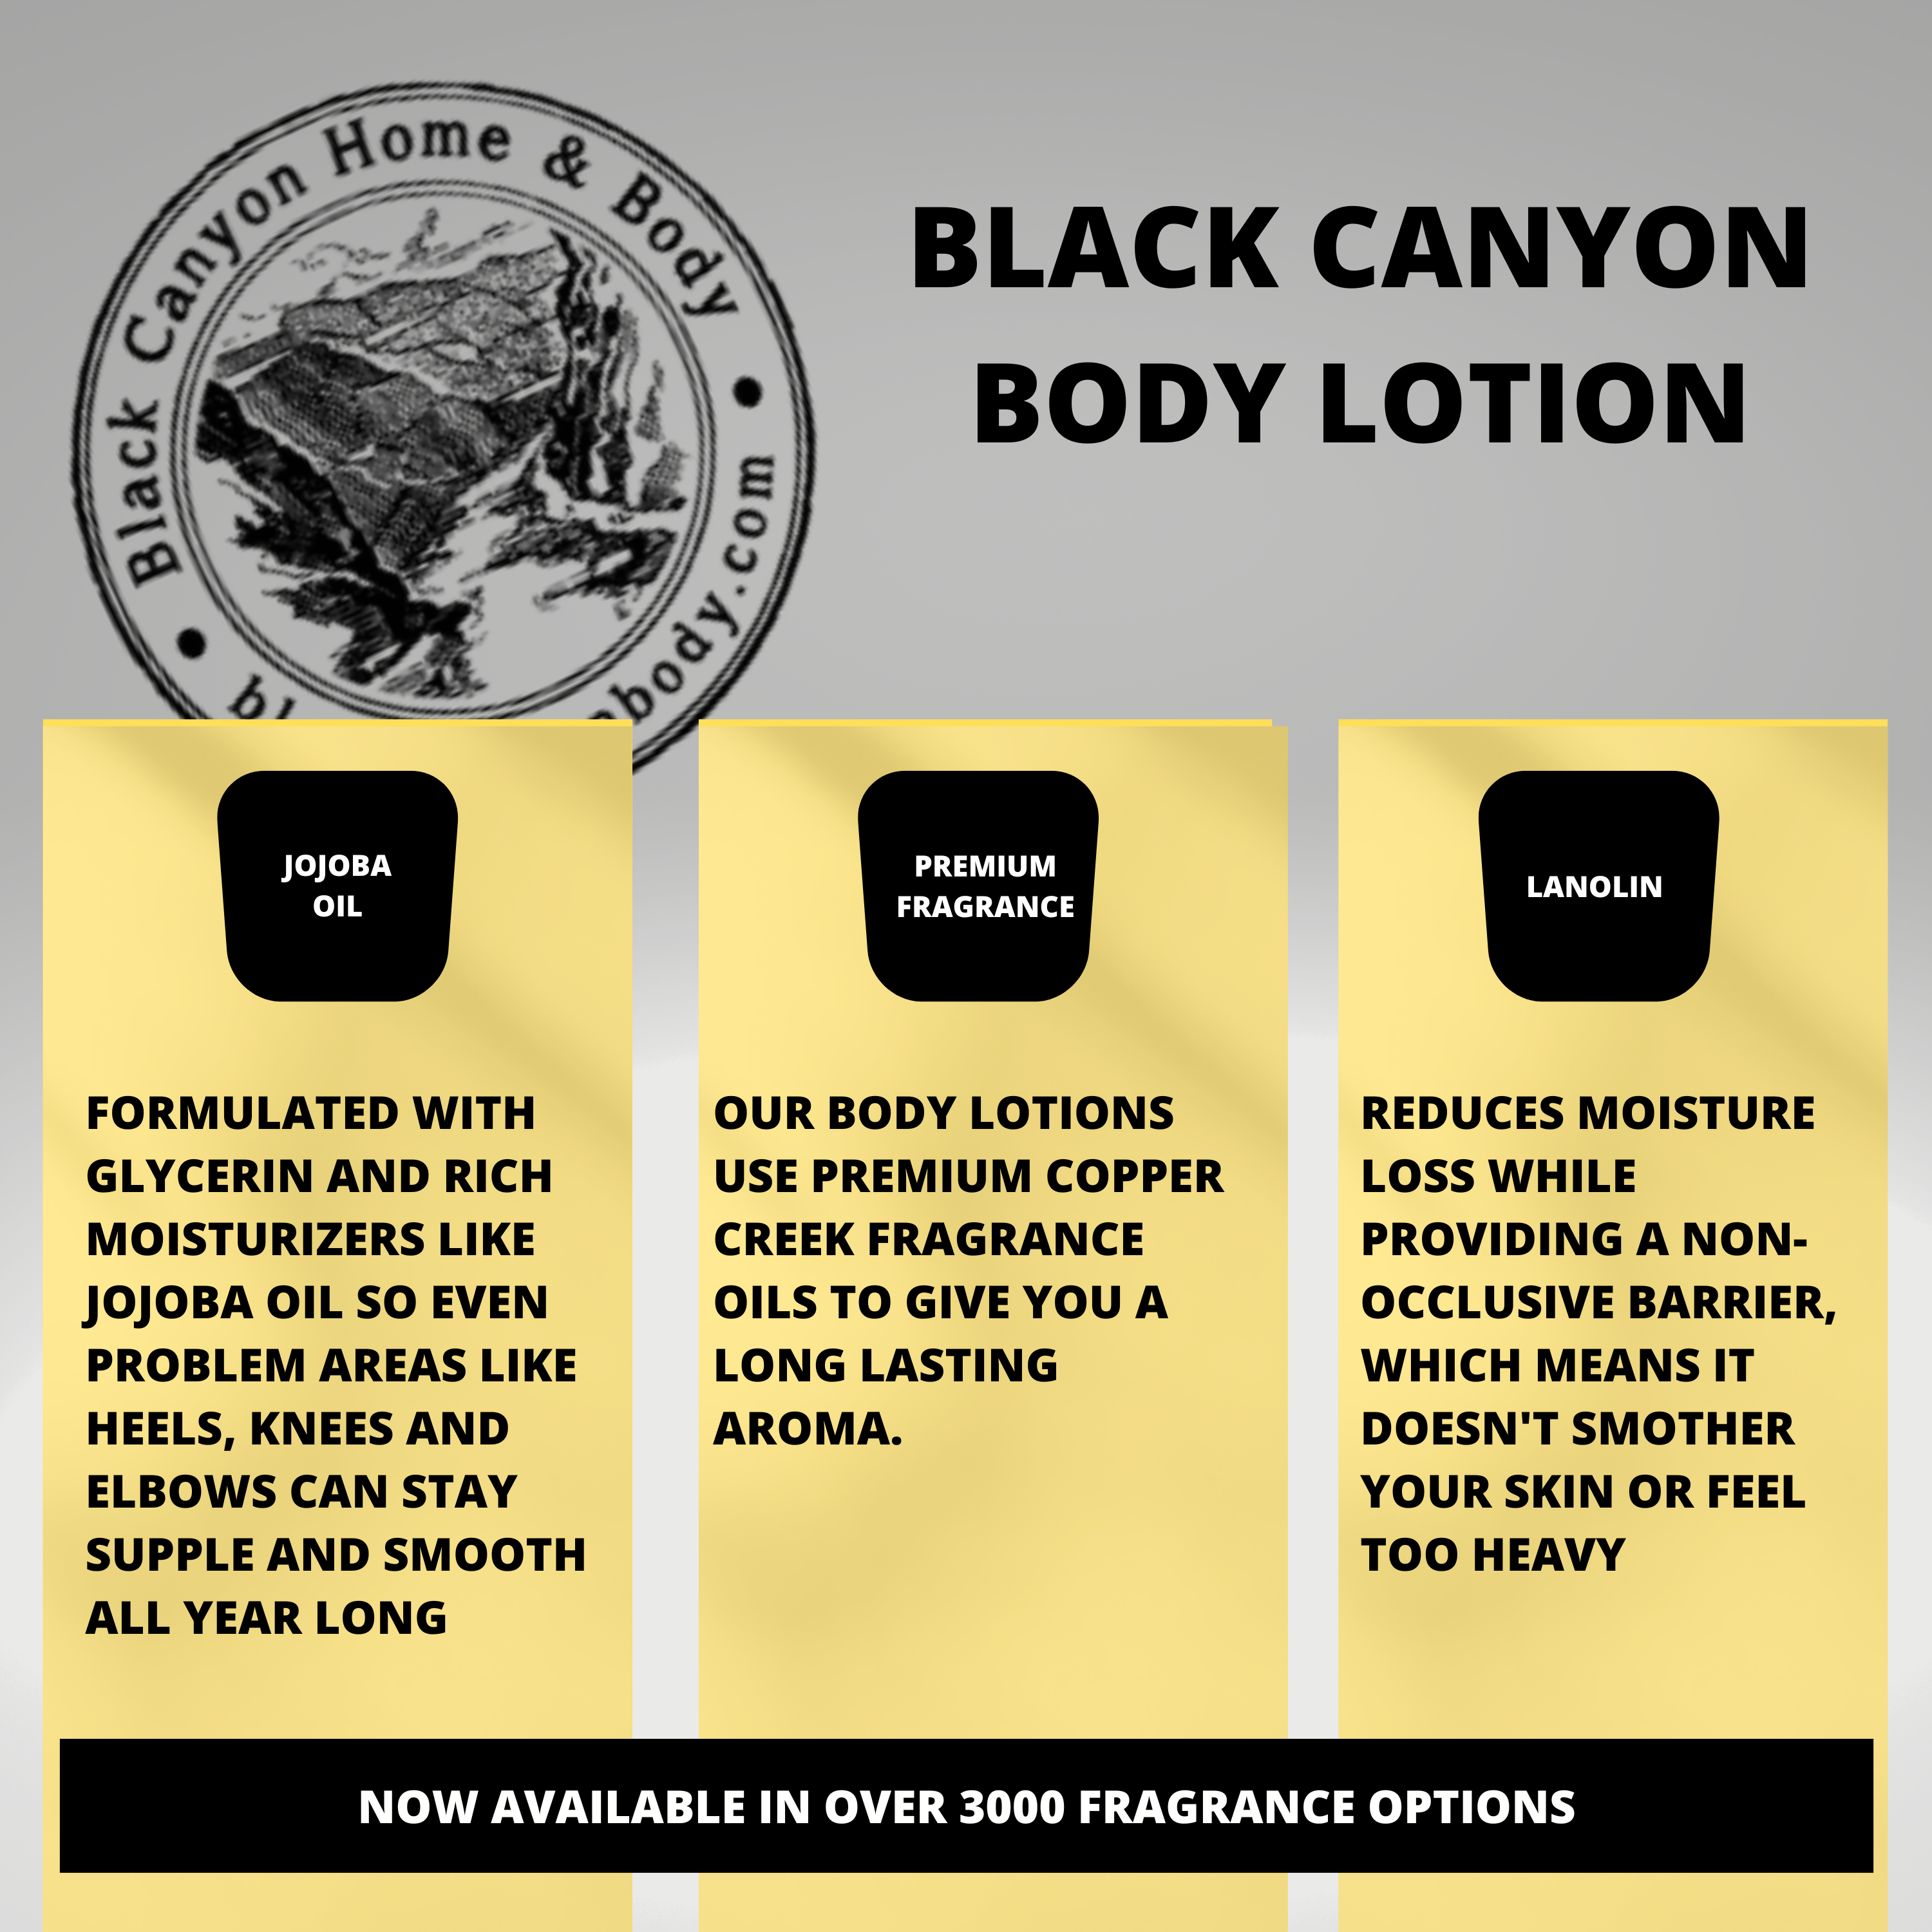 Black Canyon Autumn Dreams Scented Luxury Body Lotion with Lanolin and Jojoba Oil